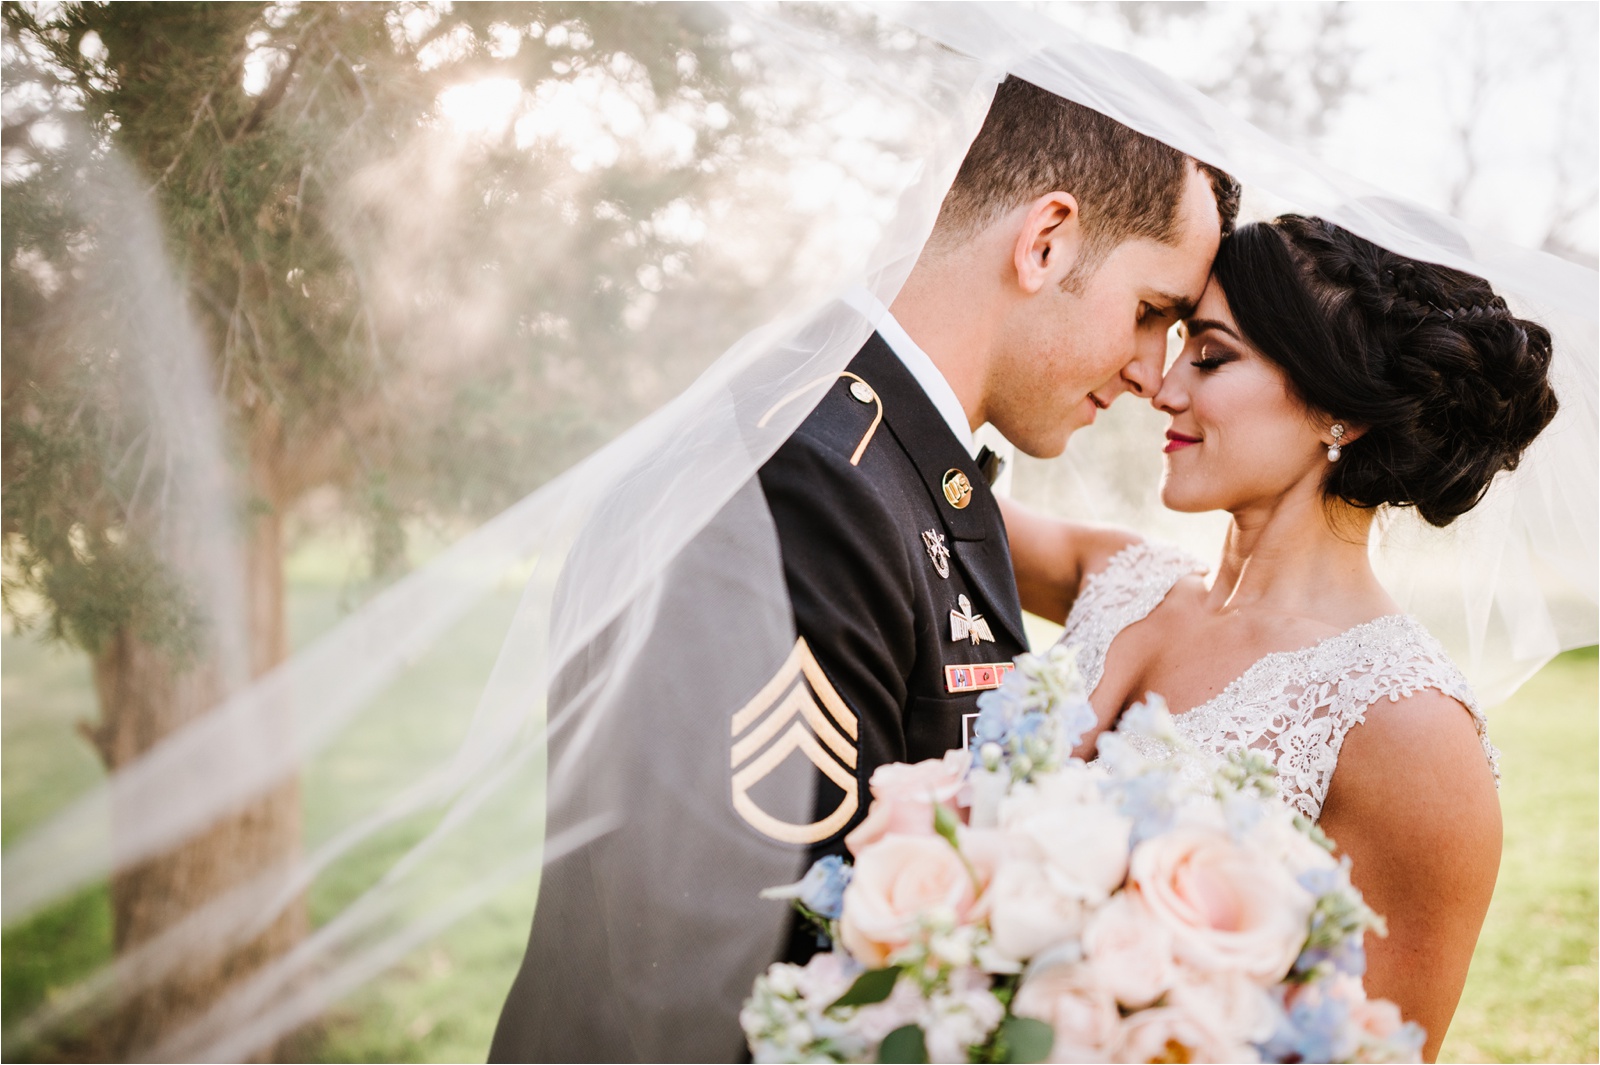 Spring Military Wedding at the Hellenic Center in Ipswich, MA by Boston Wedding Photographer Annmarie Swift